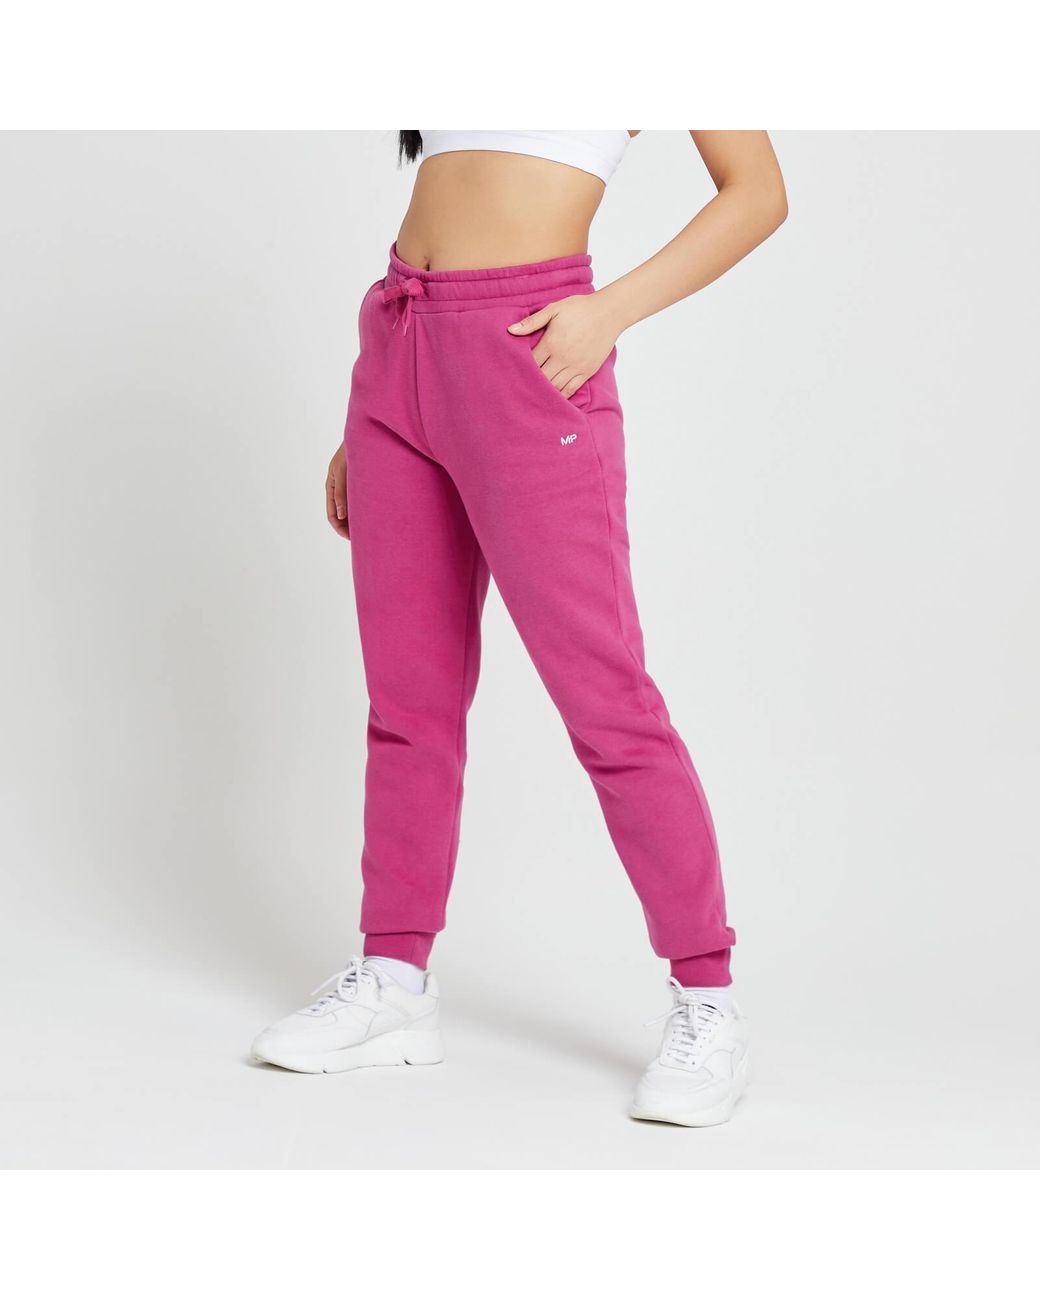 Mp Rest Day Joggers in Pink